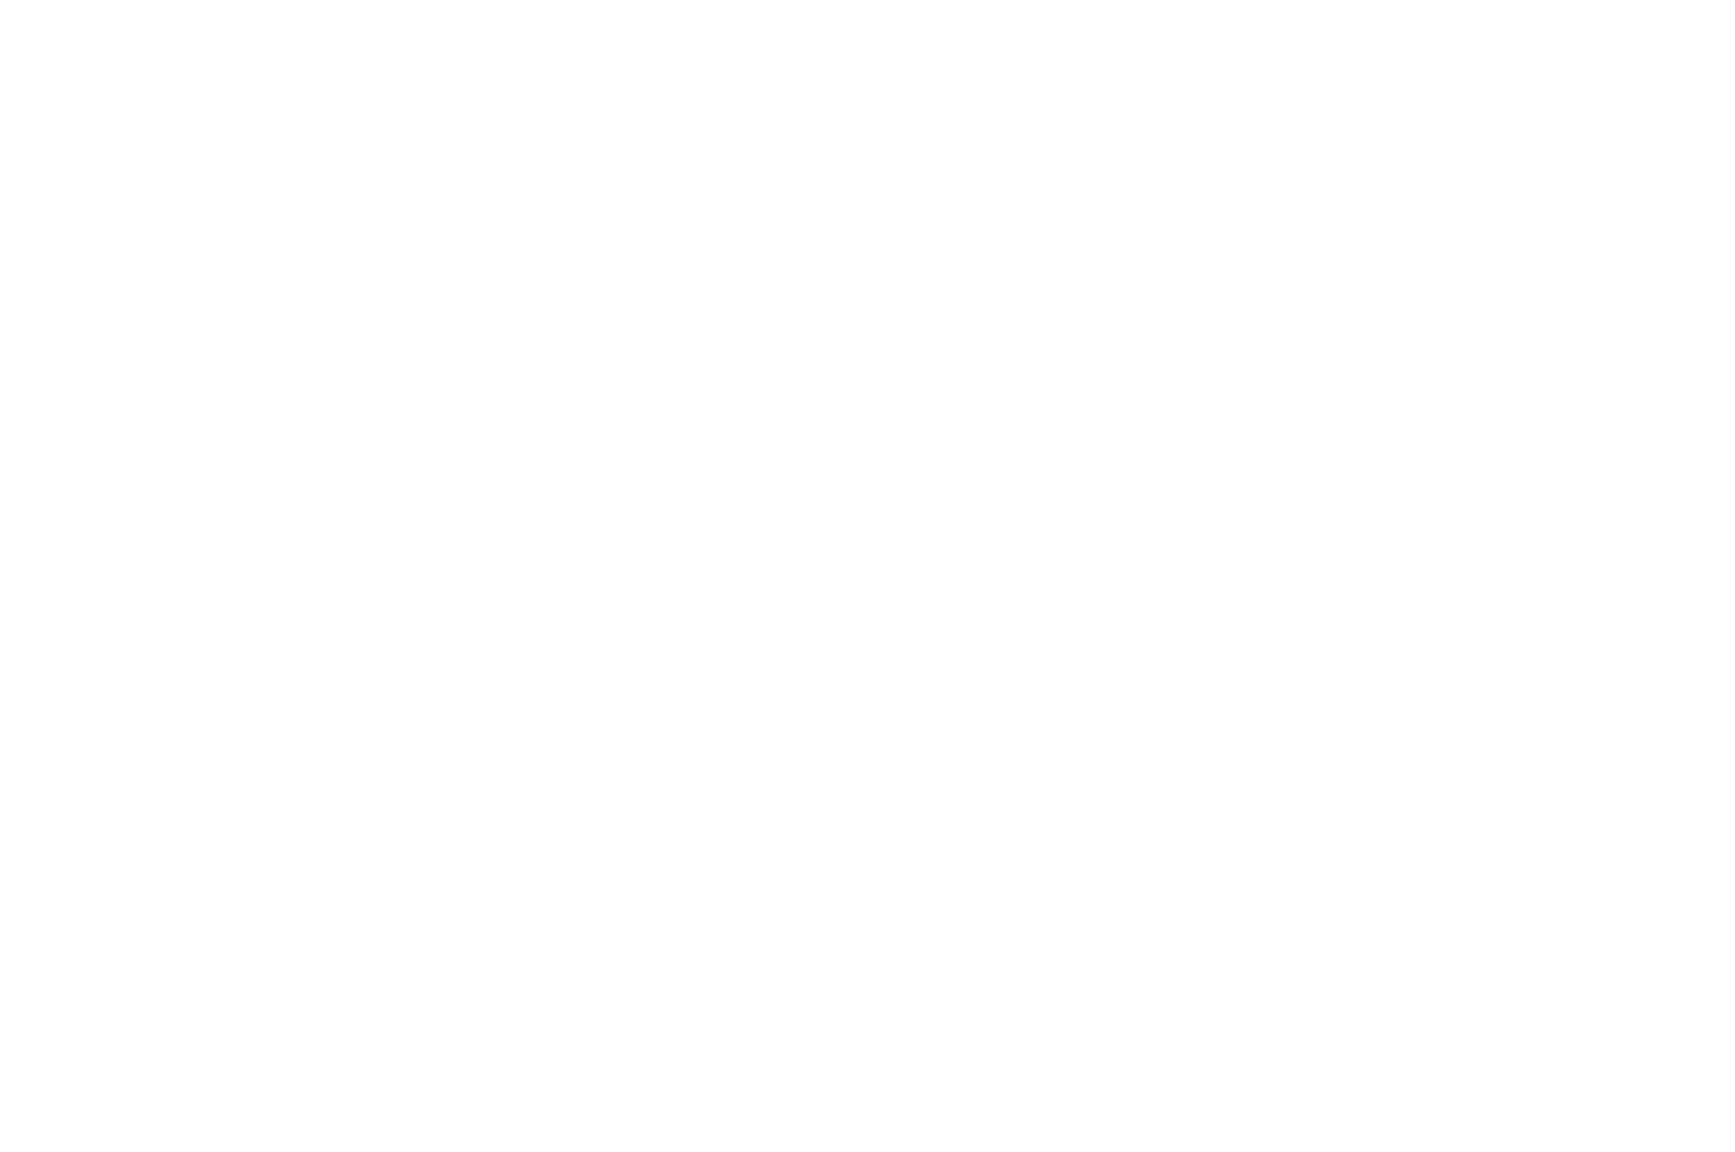 Grand Prize Winner   Velocity Motion Graphics  HDR   2014